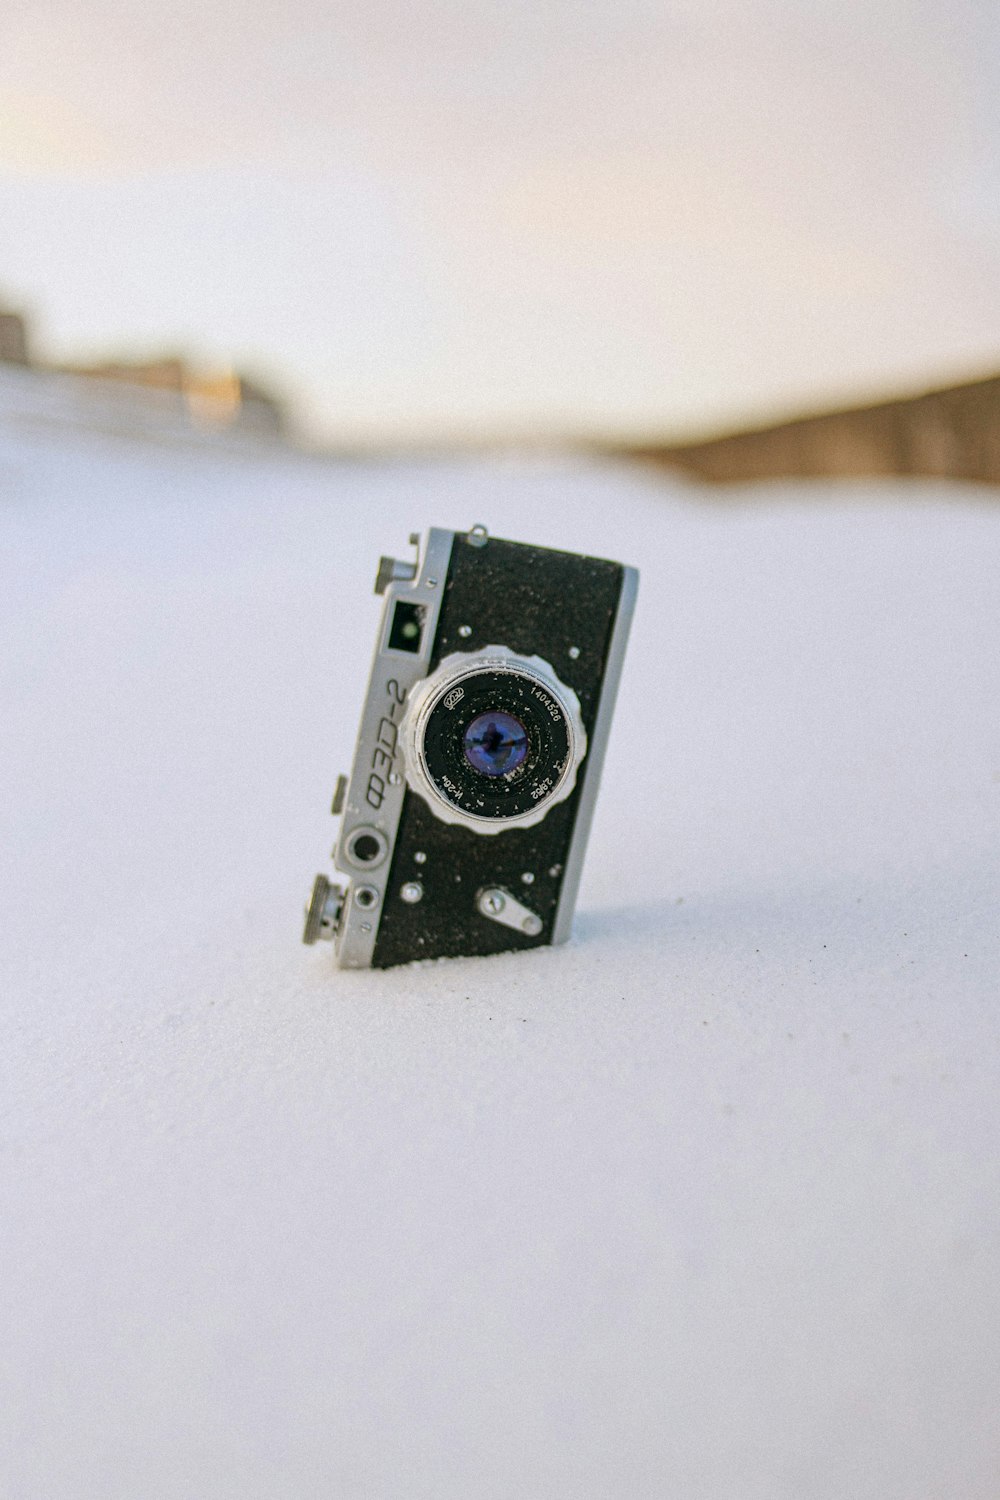 black and gray camera on white surface